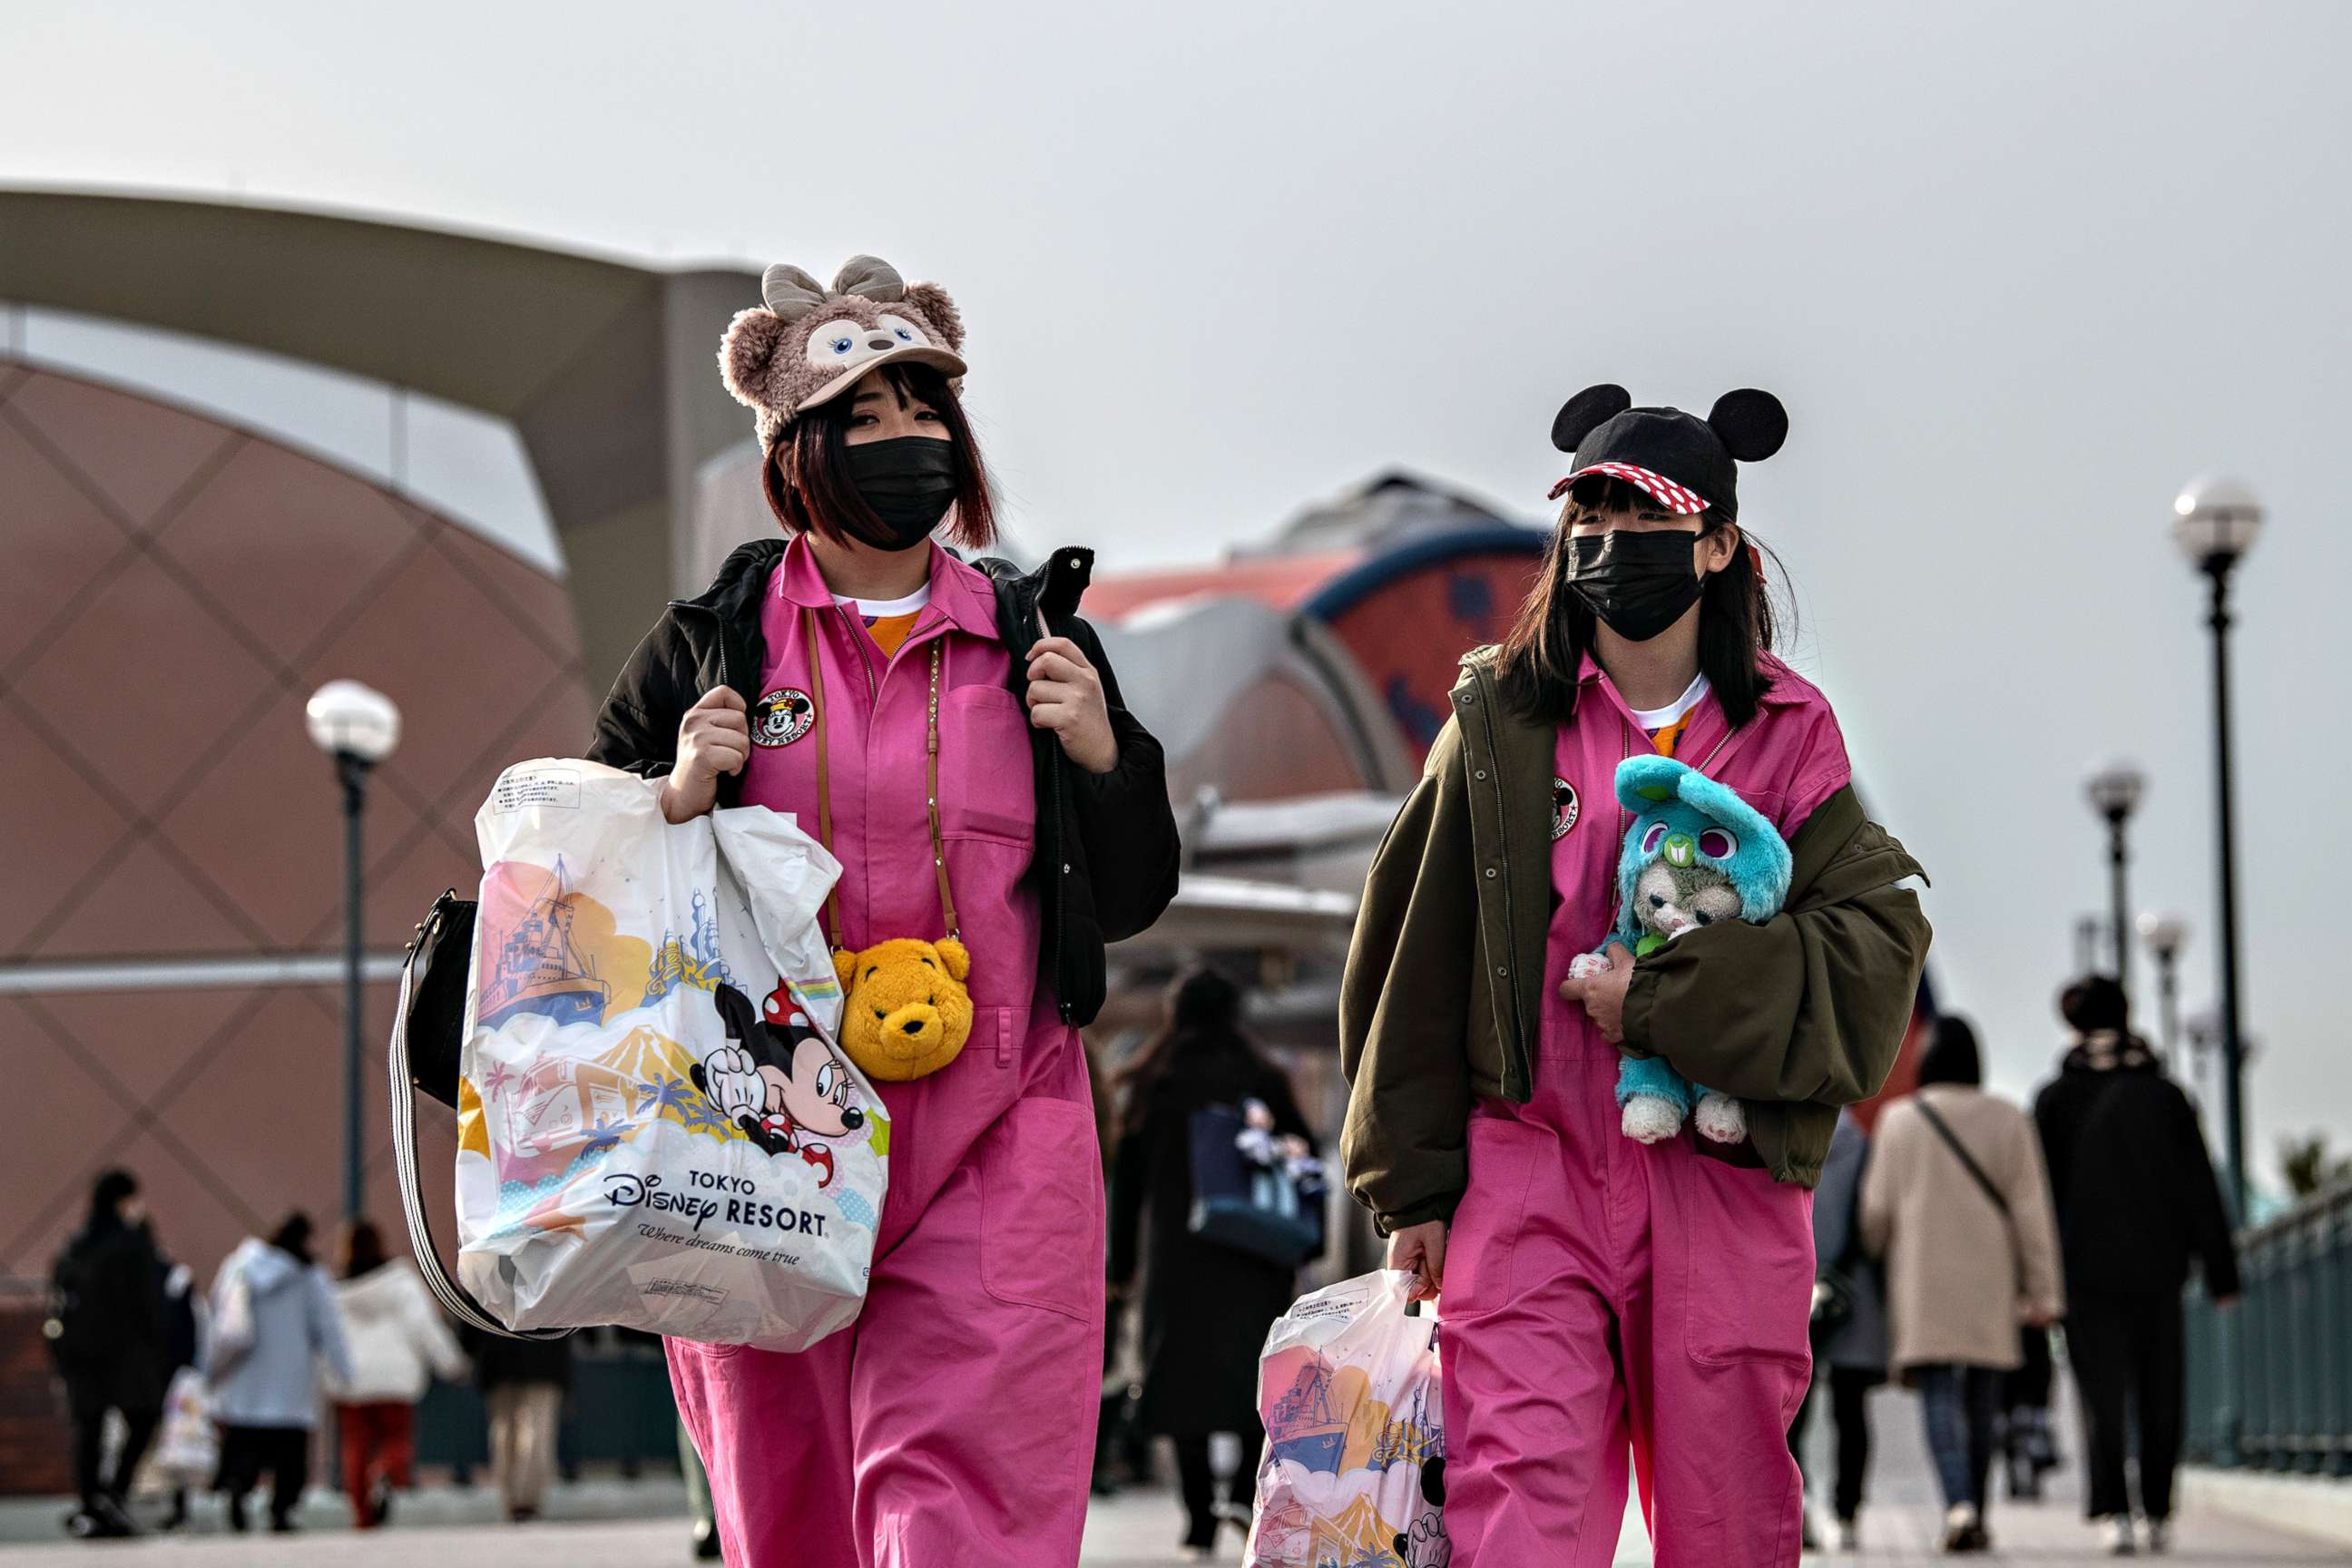 PHOTO: Two women leave Tokyo Disneyland on the day it announced it will close until March 15th because of concerns over the COVID-19 virus, on Feb. 28, 2020 in Japan. 